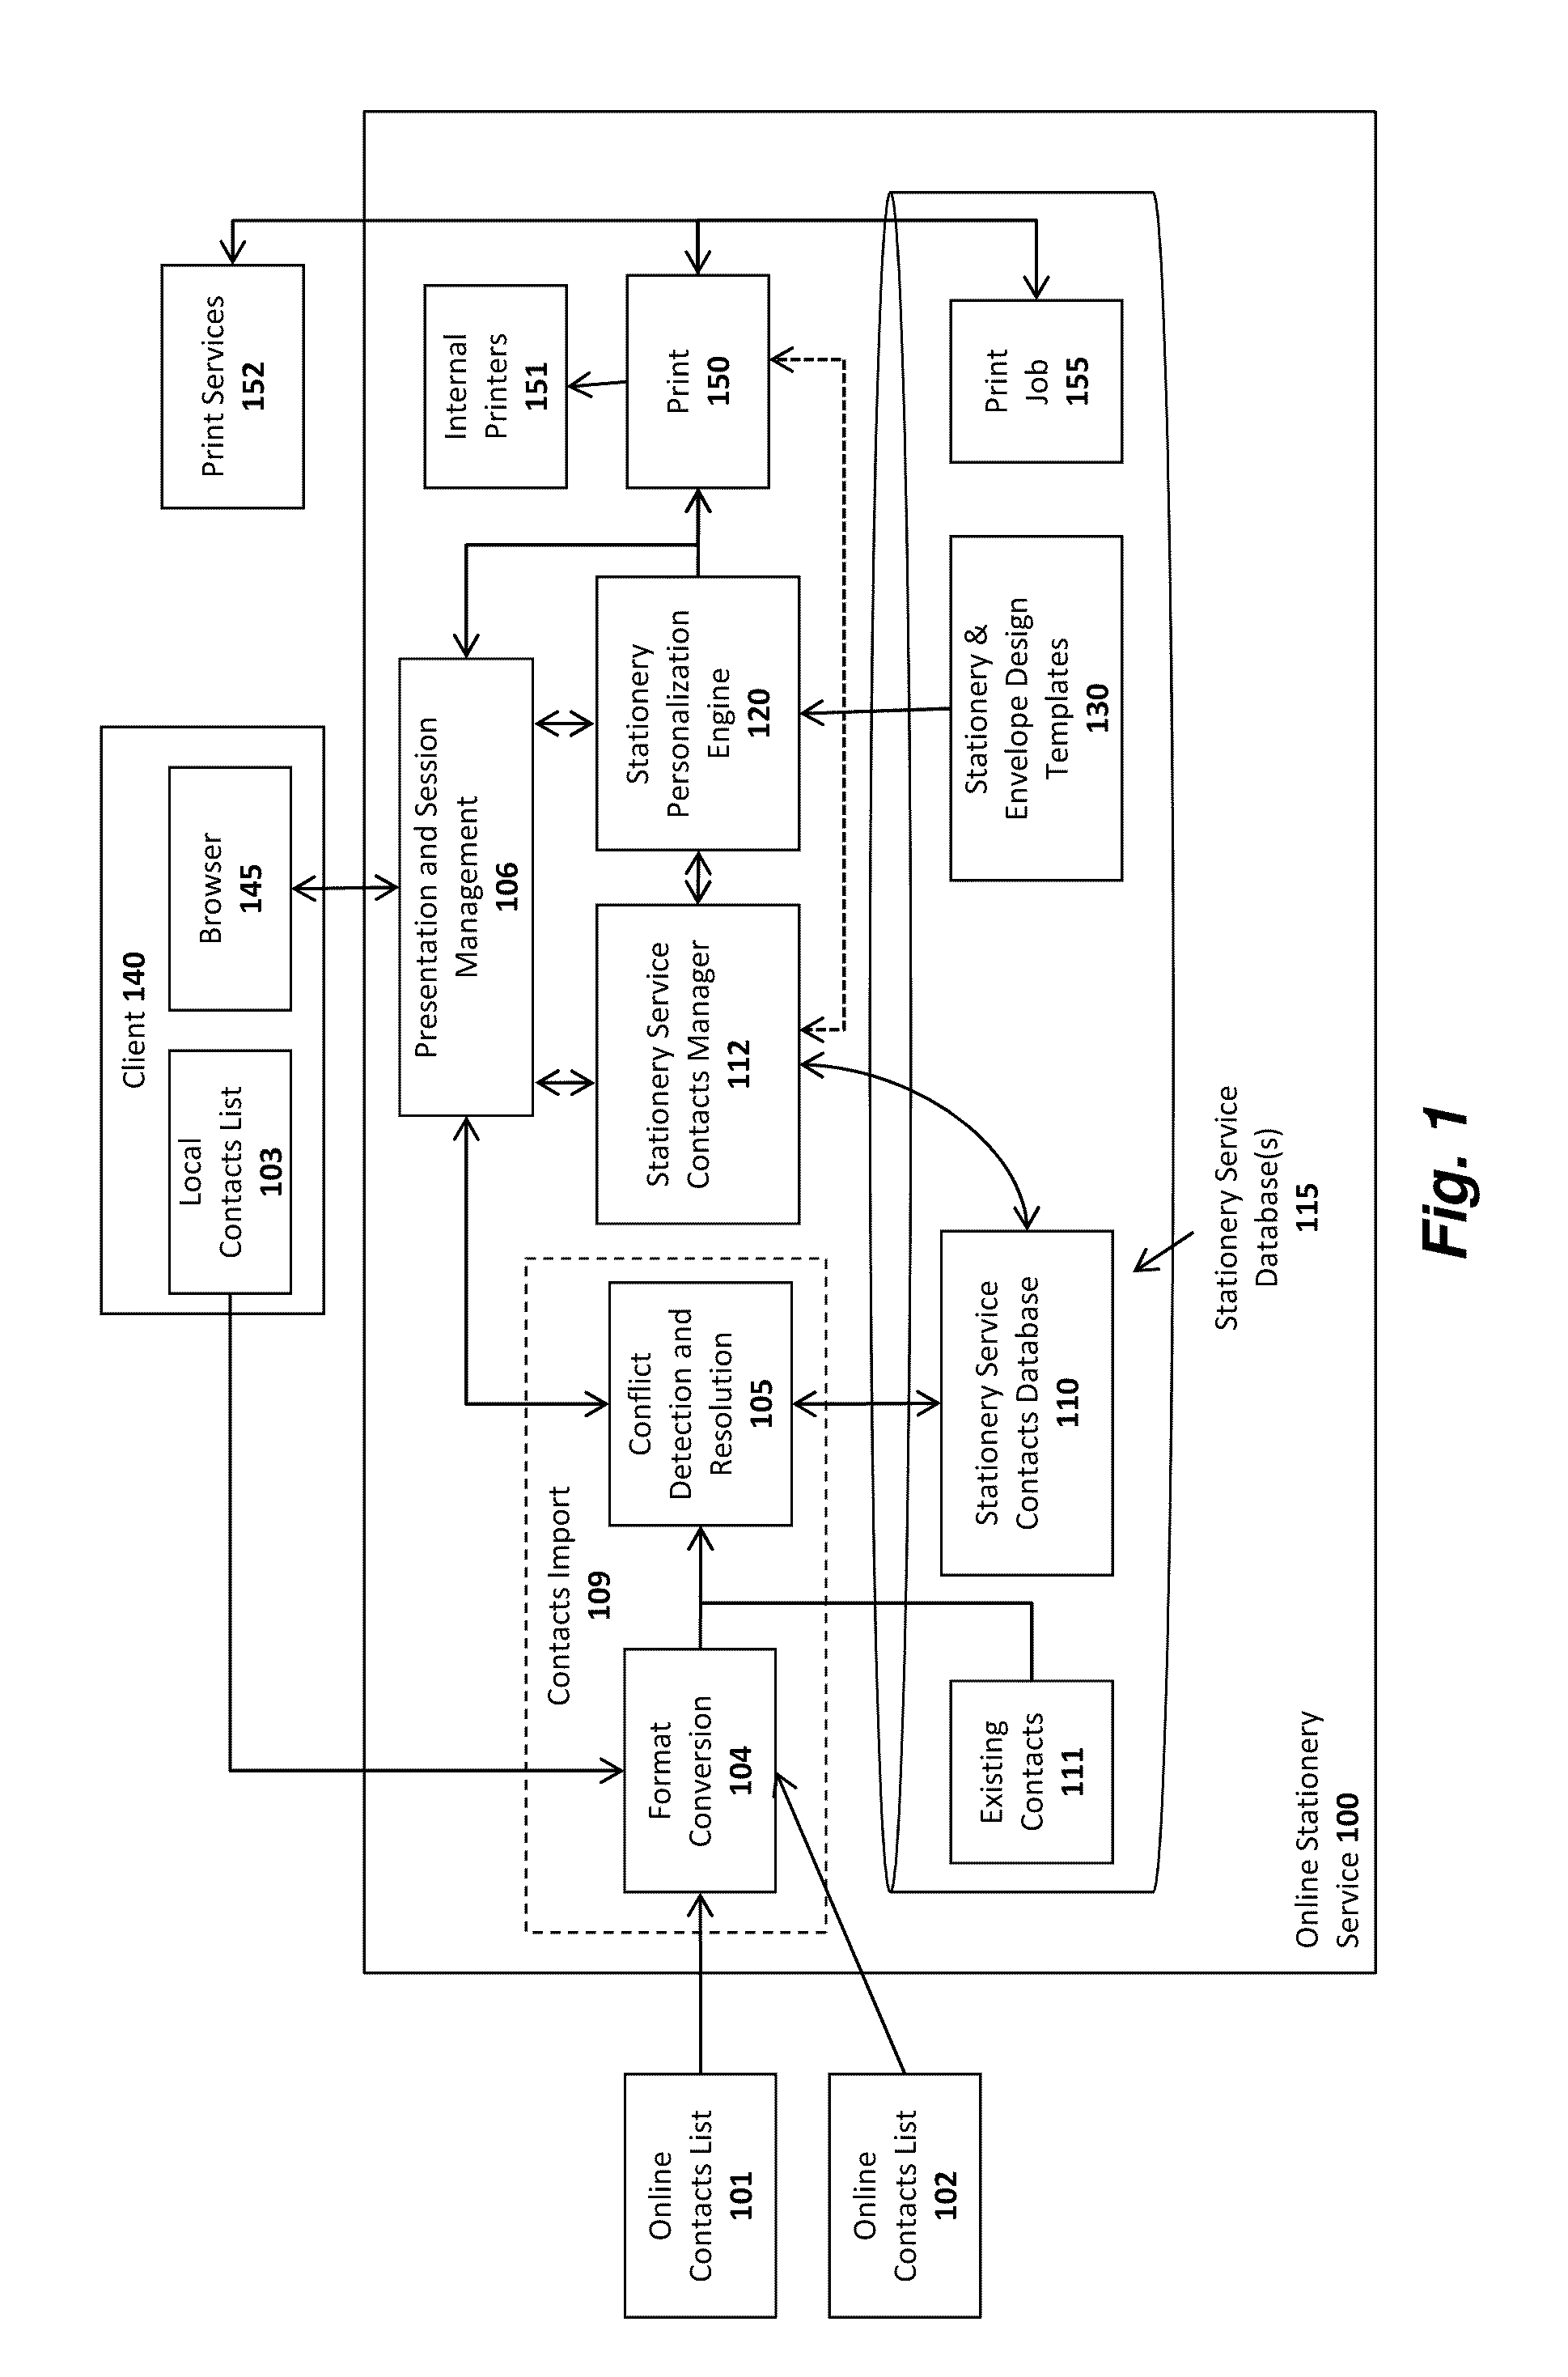 System and method for automatically laying out photos and coloring design elements within a photo story